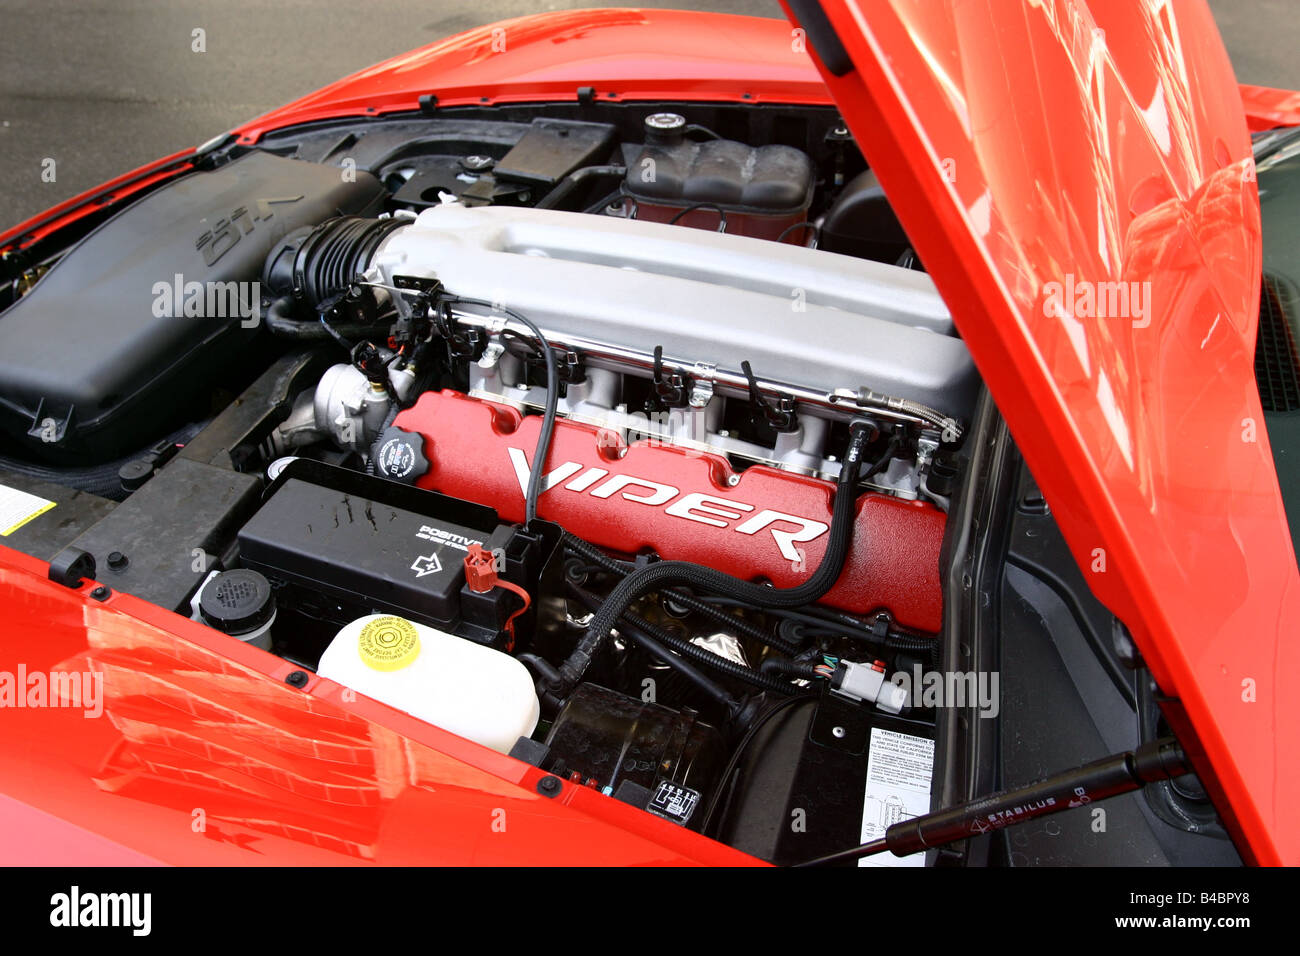 Car, Dodge Viper SRT-10, Convertible, model year 2003-, red, FGHDS, view in engine compartment, technique/accessory, accessories Stock Photo